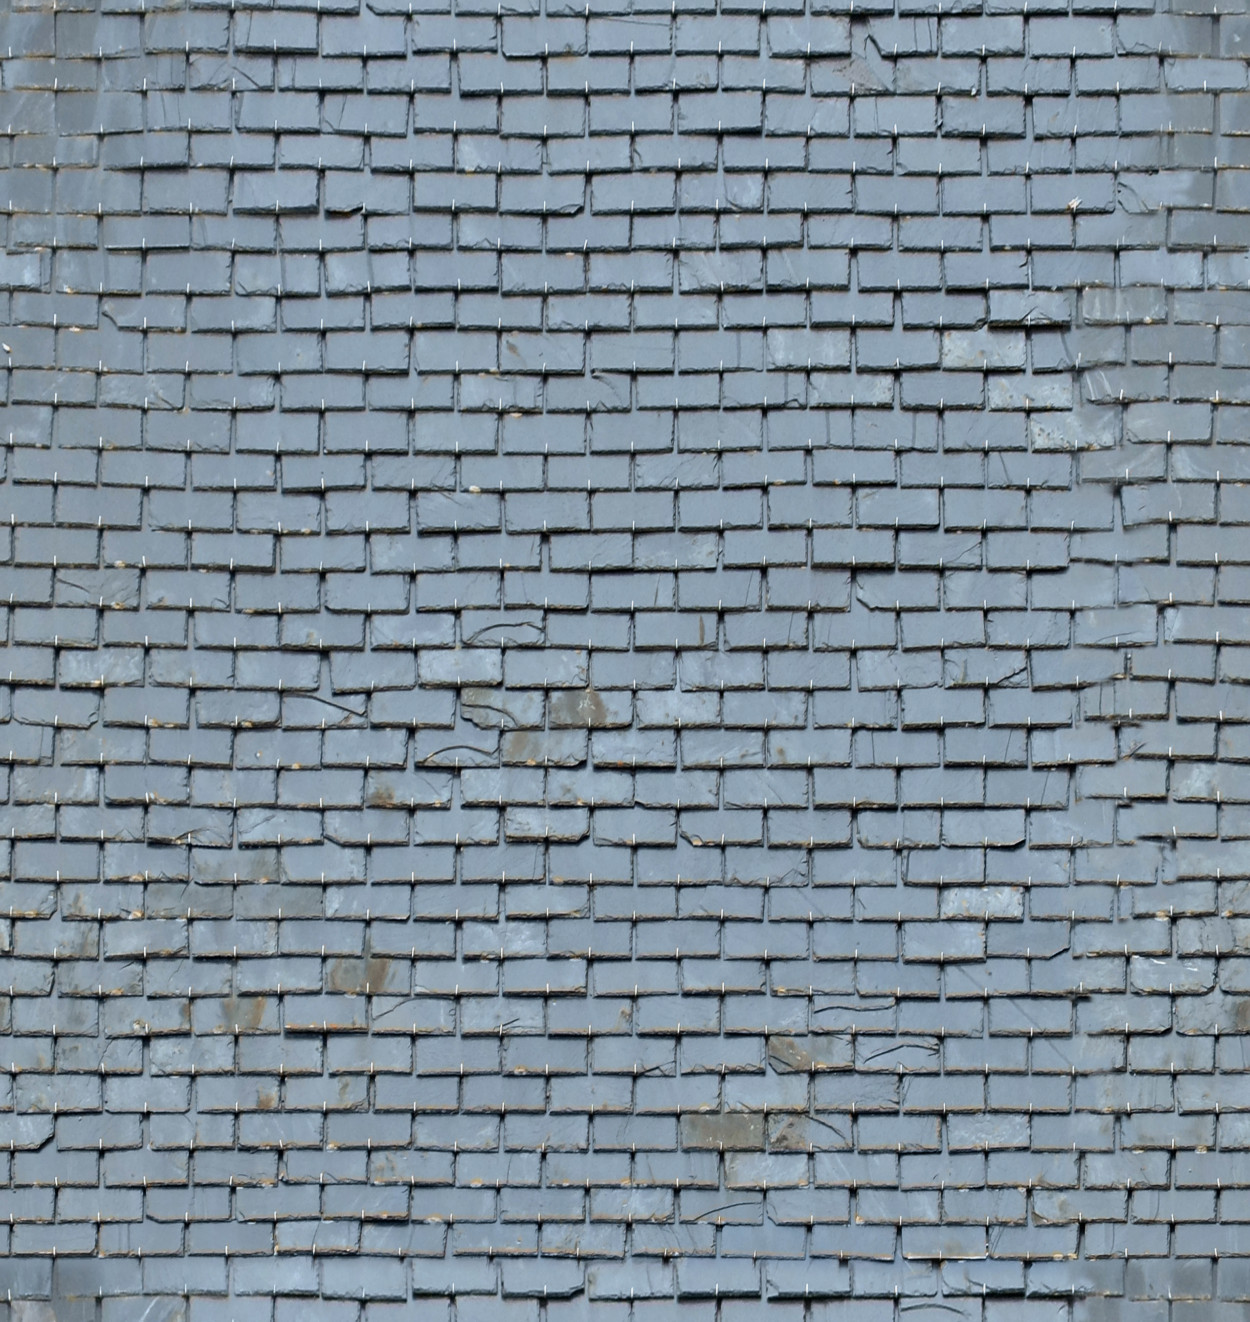 A seamless broken slate tiles texture for use in architectural drawings and 3D models